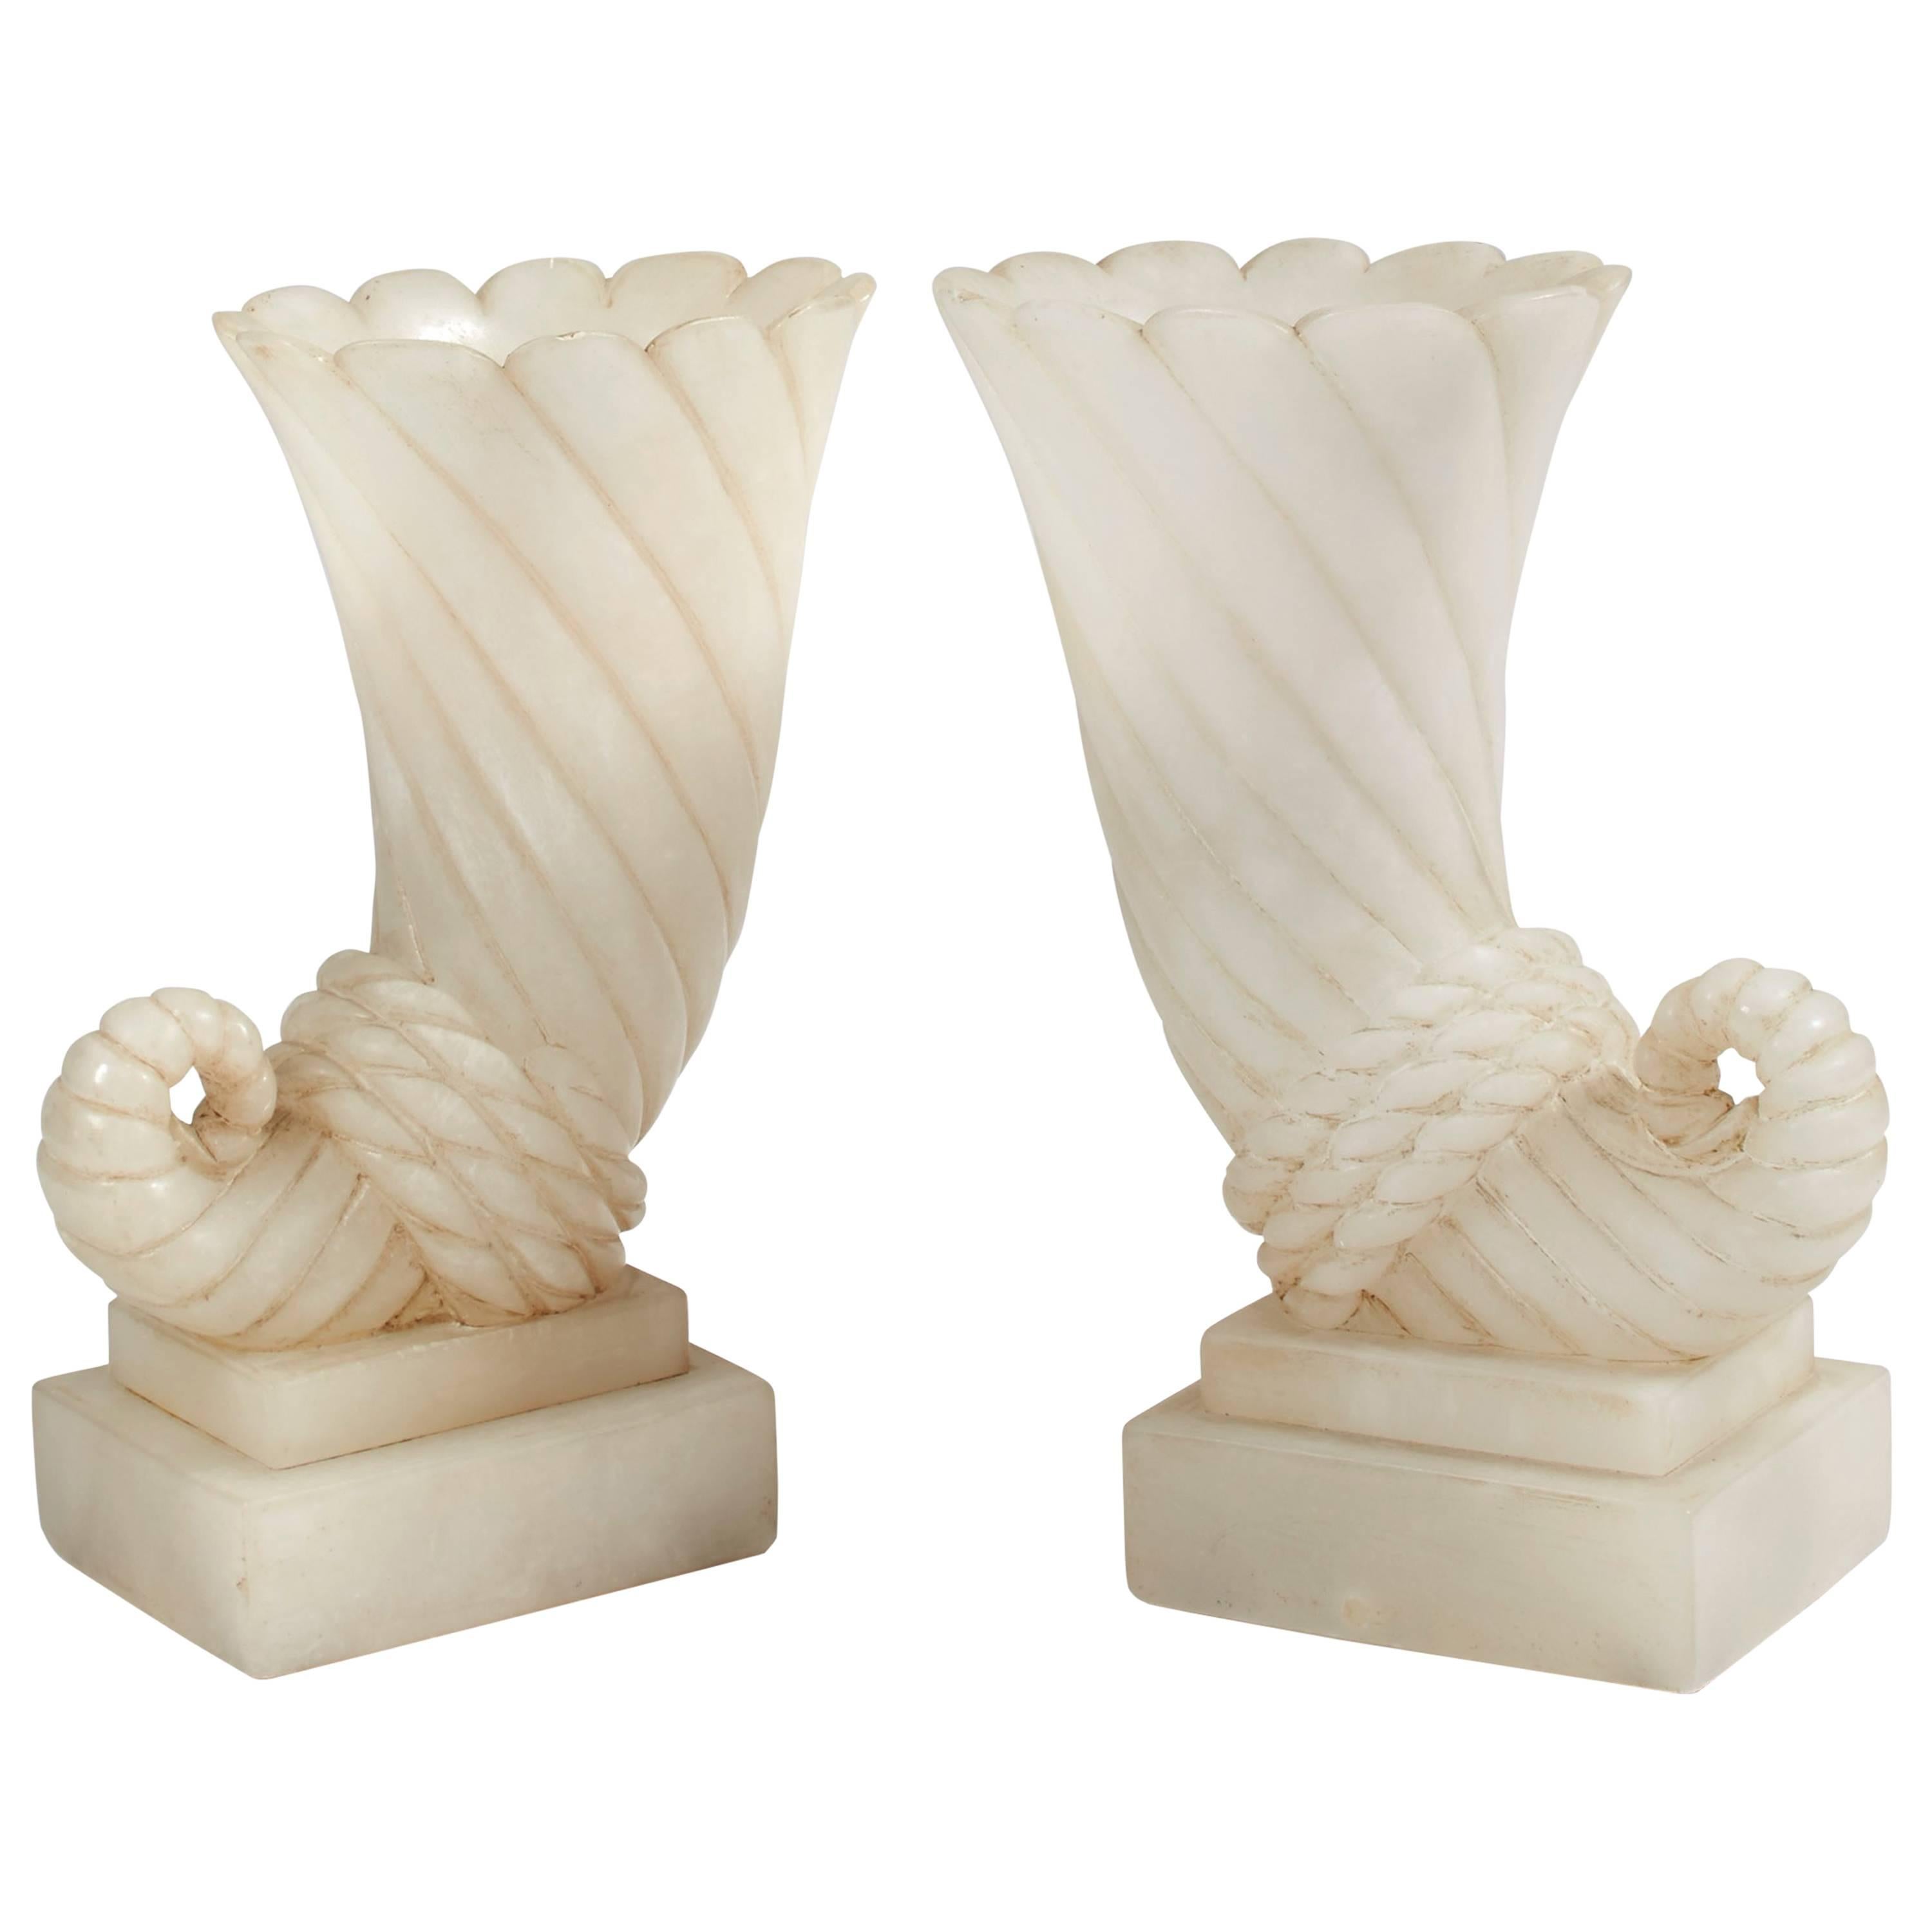 Pair of Enlightening Vases by Serge Roche, circa 1925 For Sale